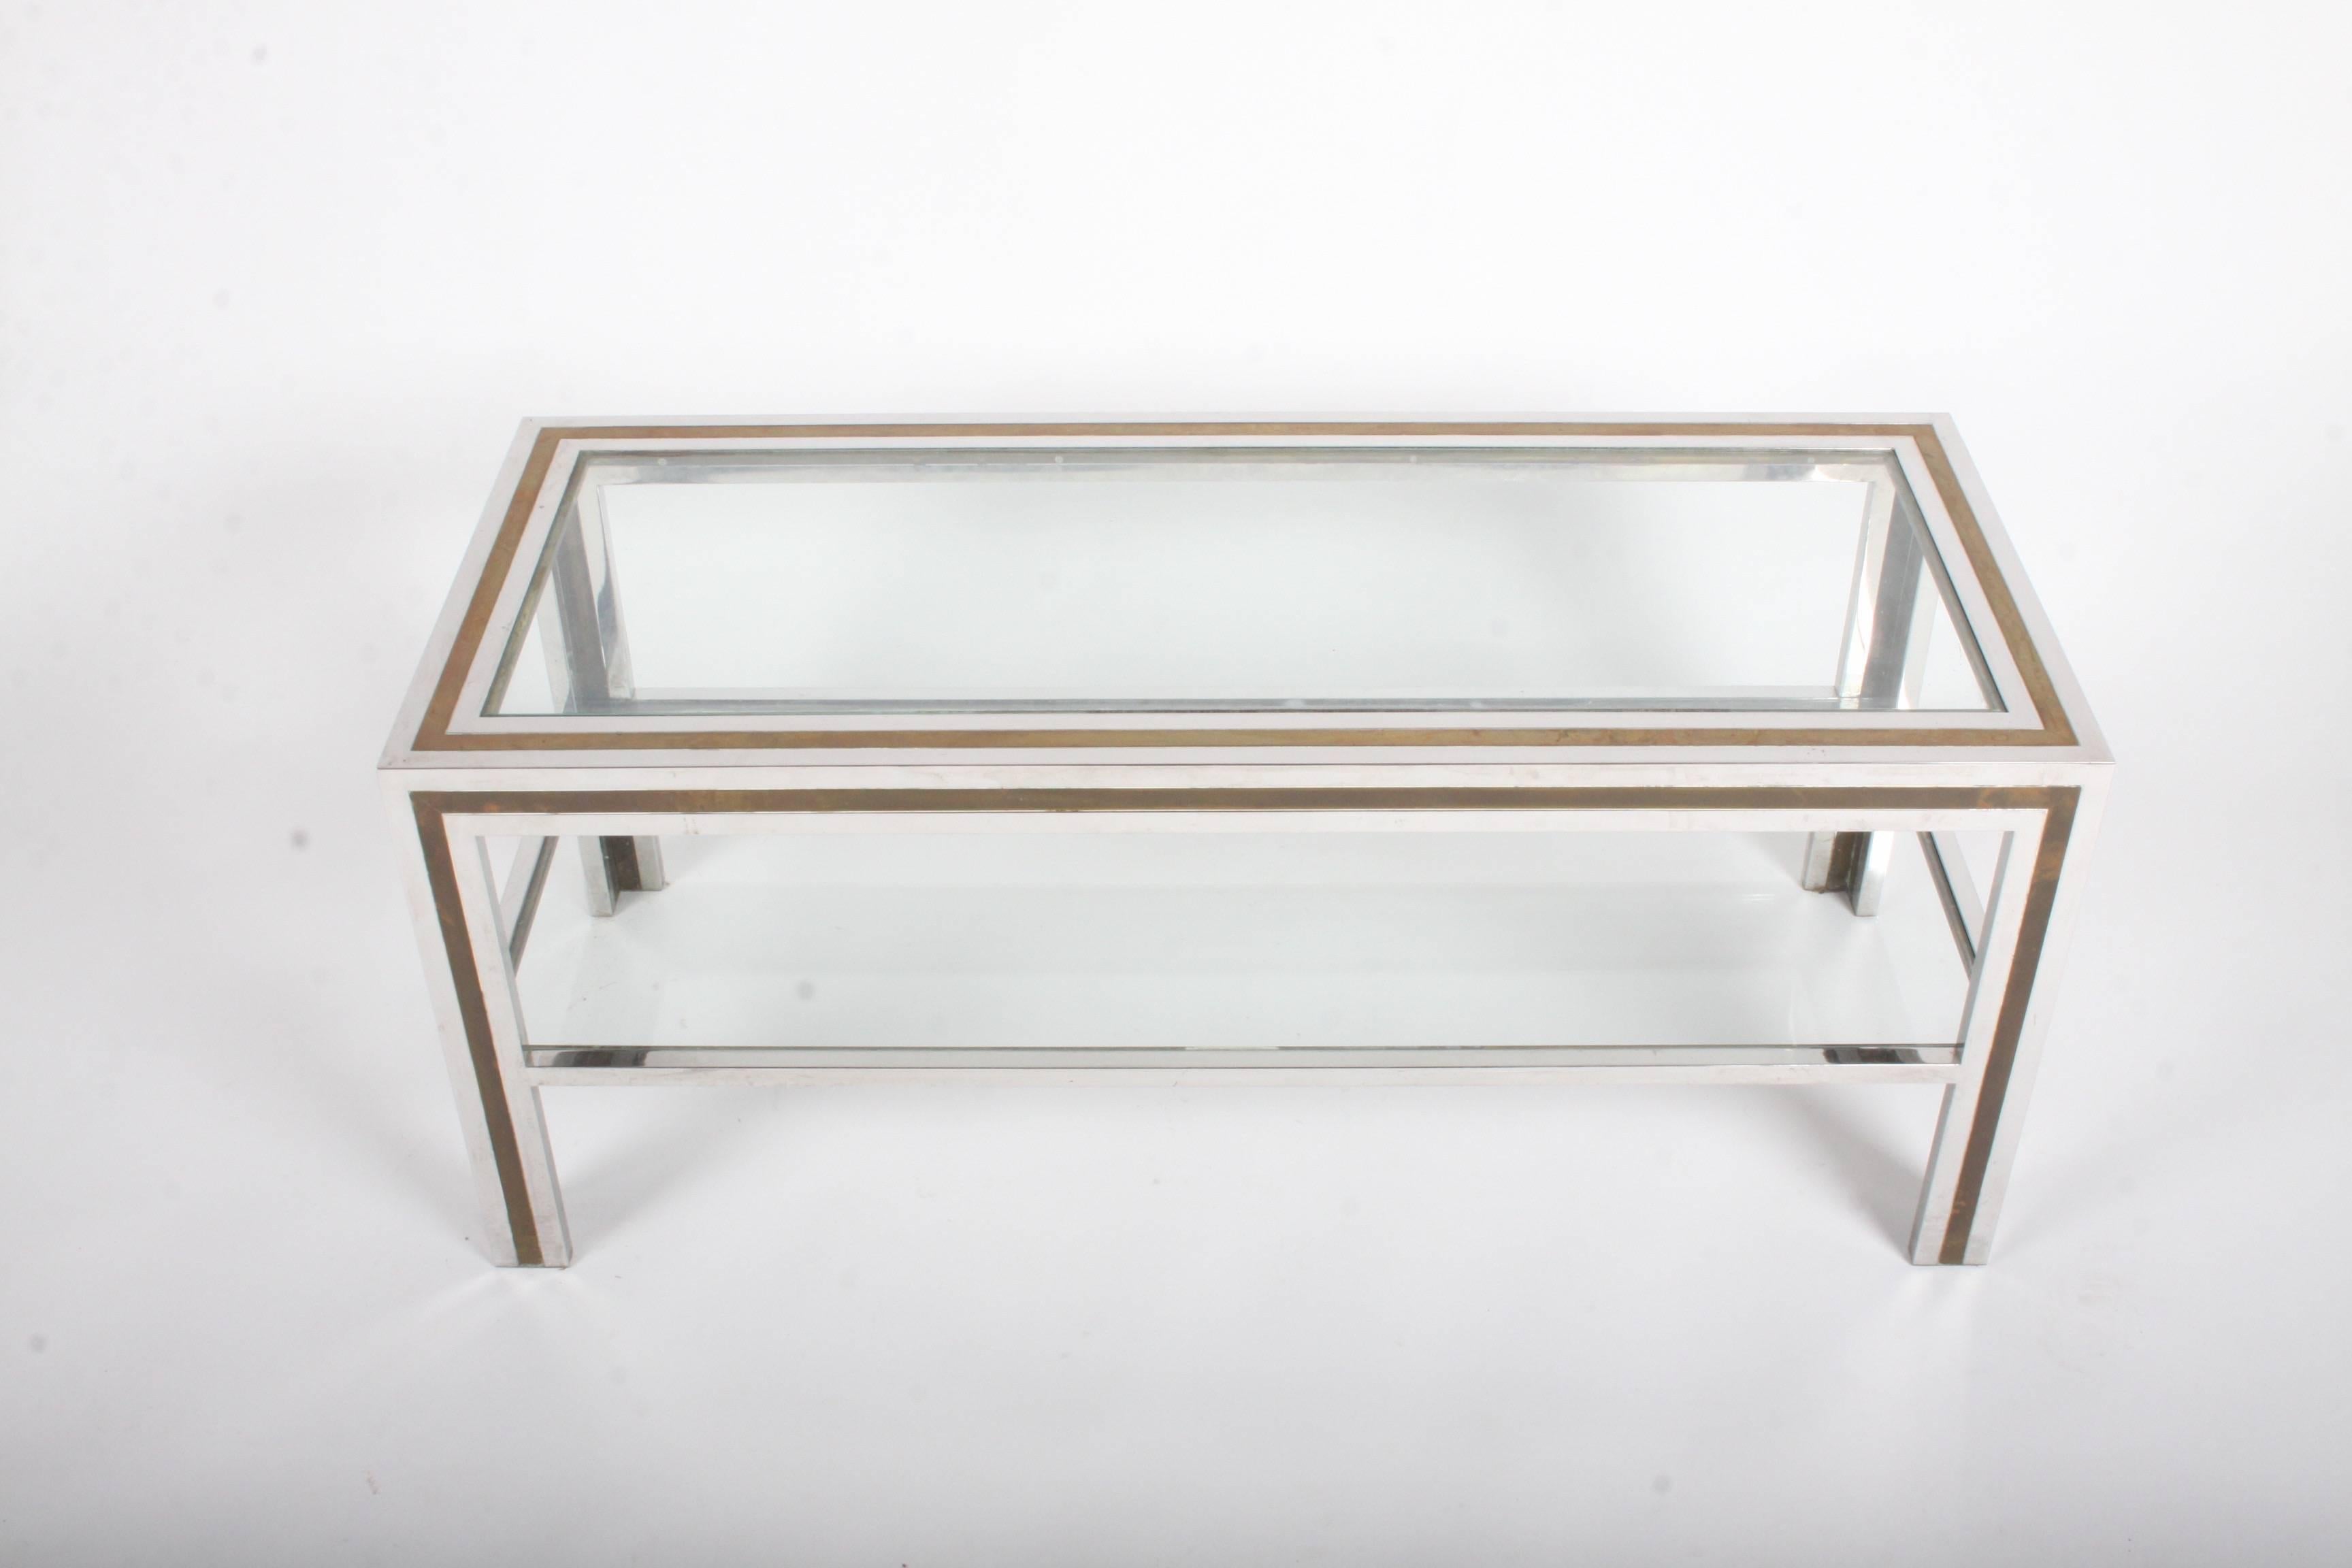 Vintage Italian 1970s chrome and brass two-tier coffee table. Minor scuffs to chrome and patina to brass, glass has light scratches. The two tone frame reminds me of Gucci's picture frames from the late 1970s and early 1980s. Lower shelf is 8.75